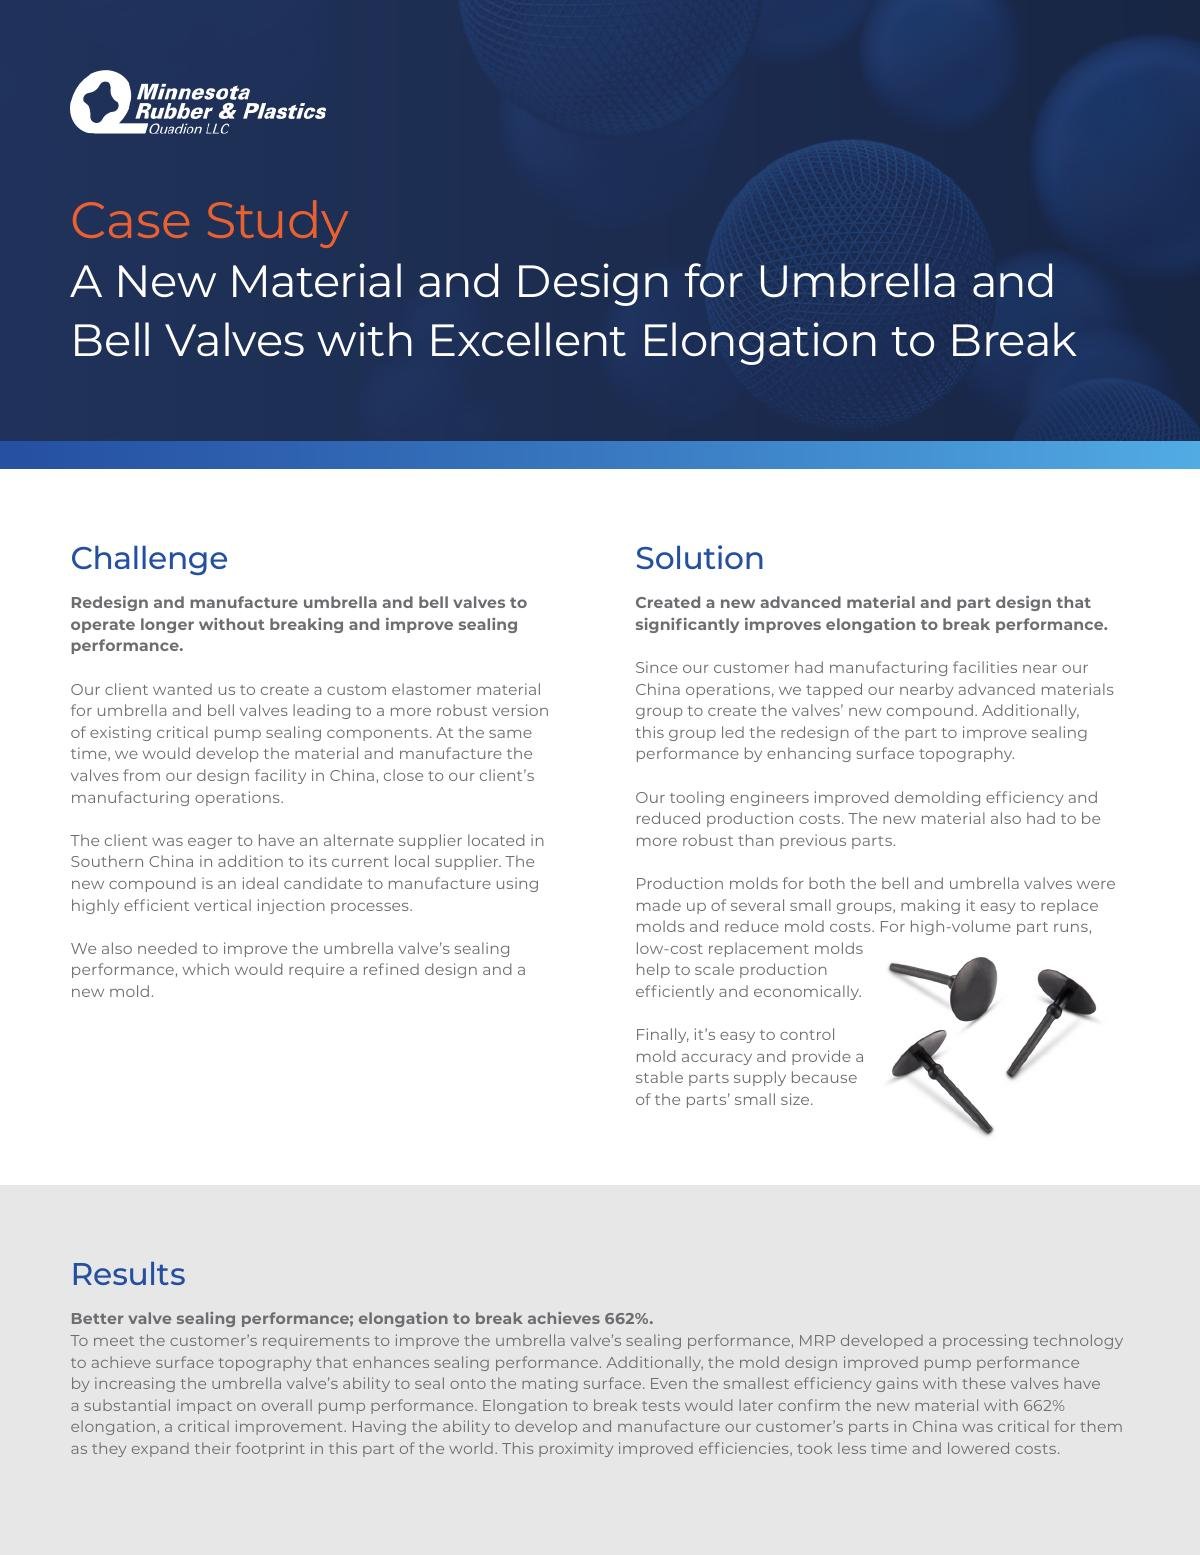 A New Material and Design for Rubber Umbrella and Bell Valves with Excellent Elongation at Break